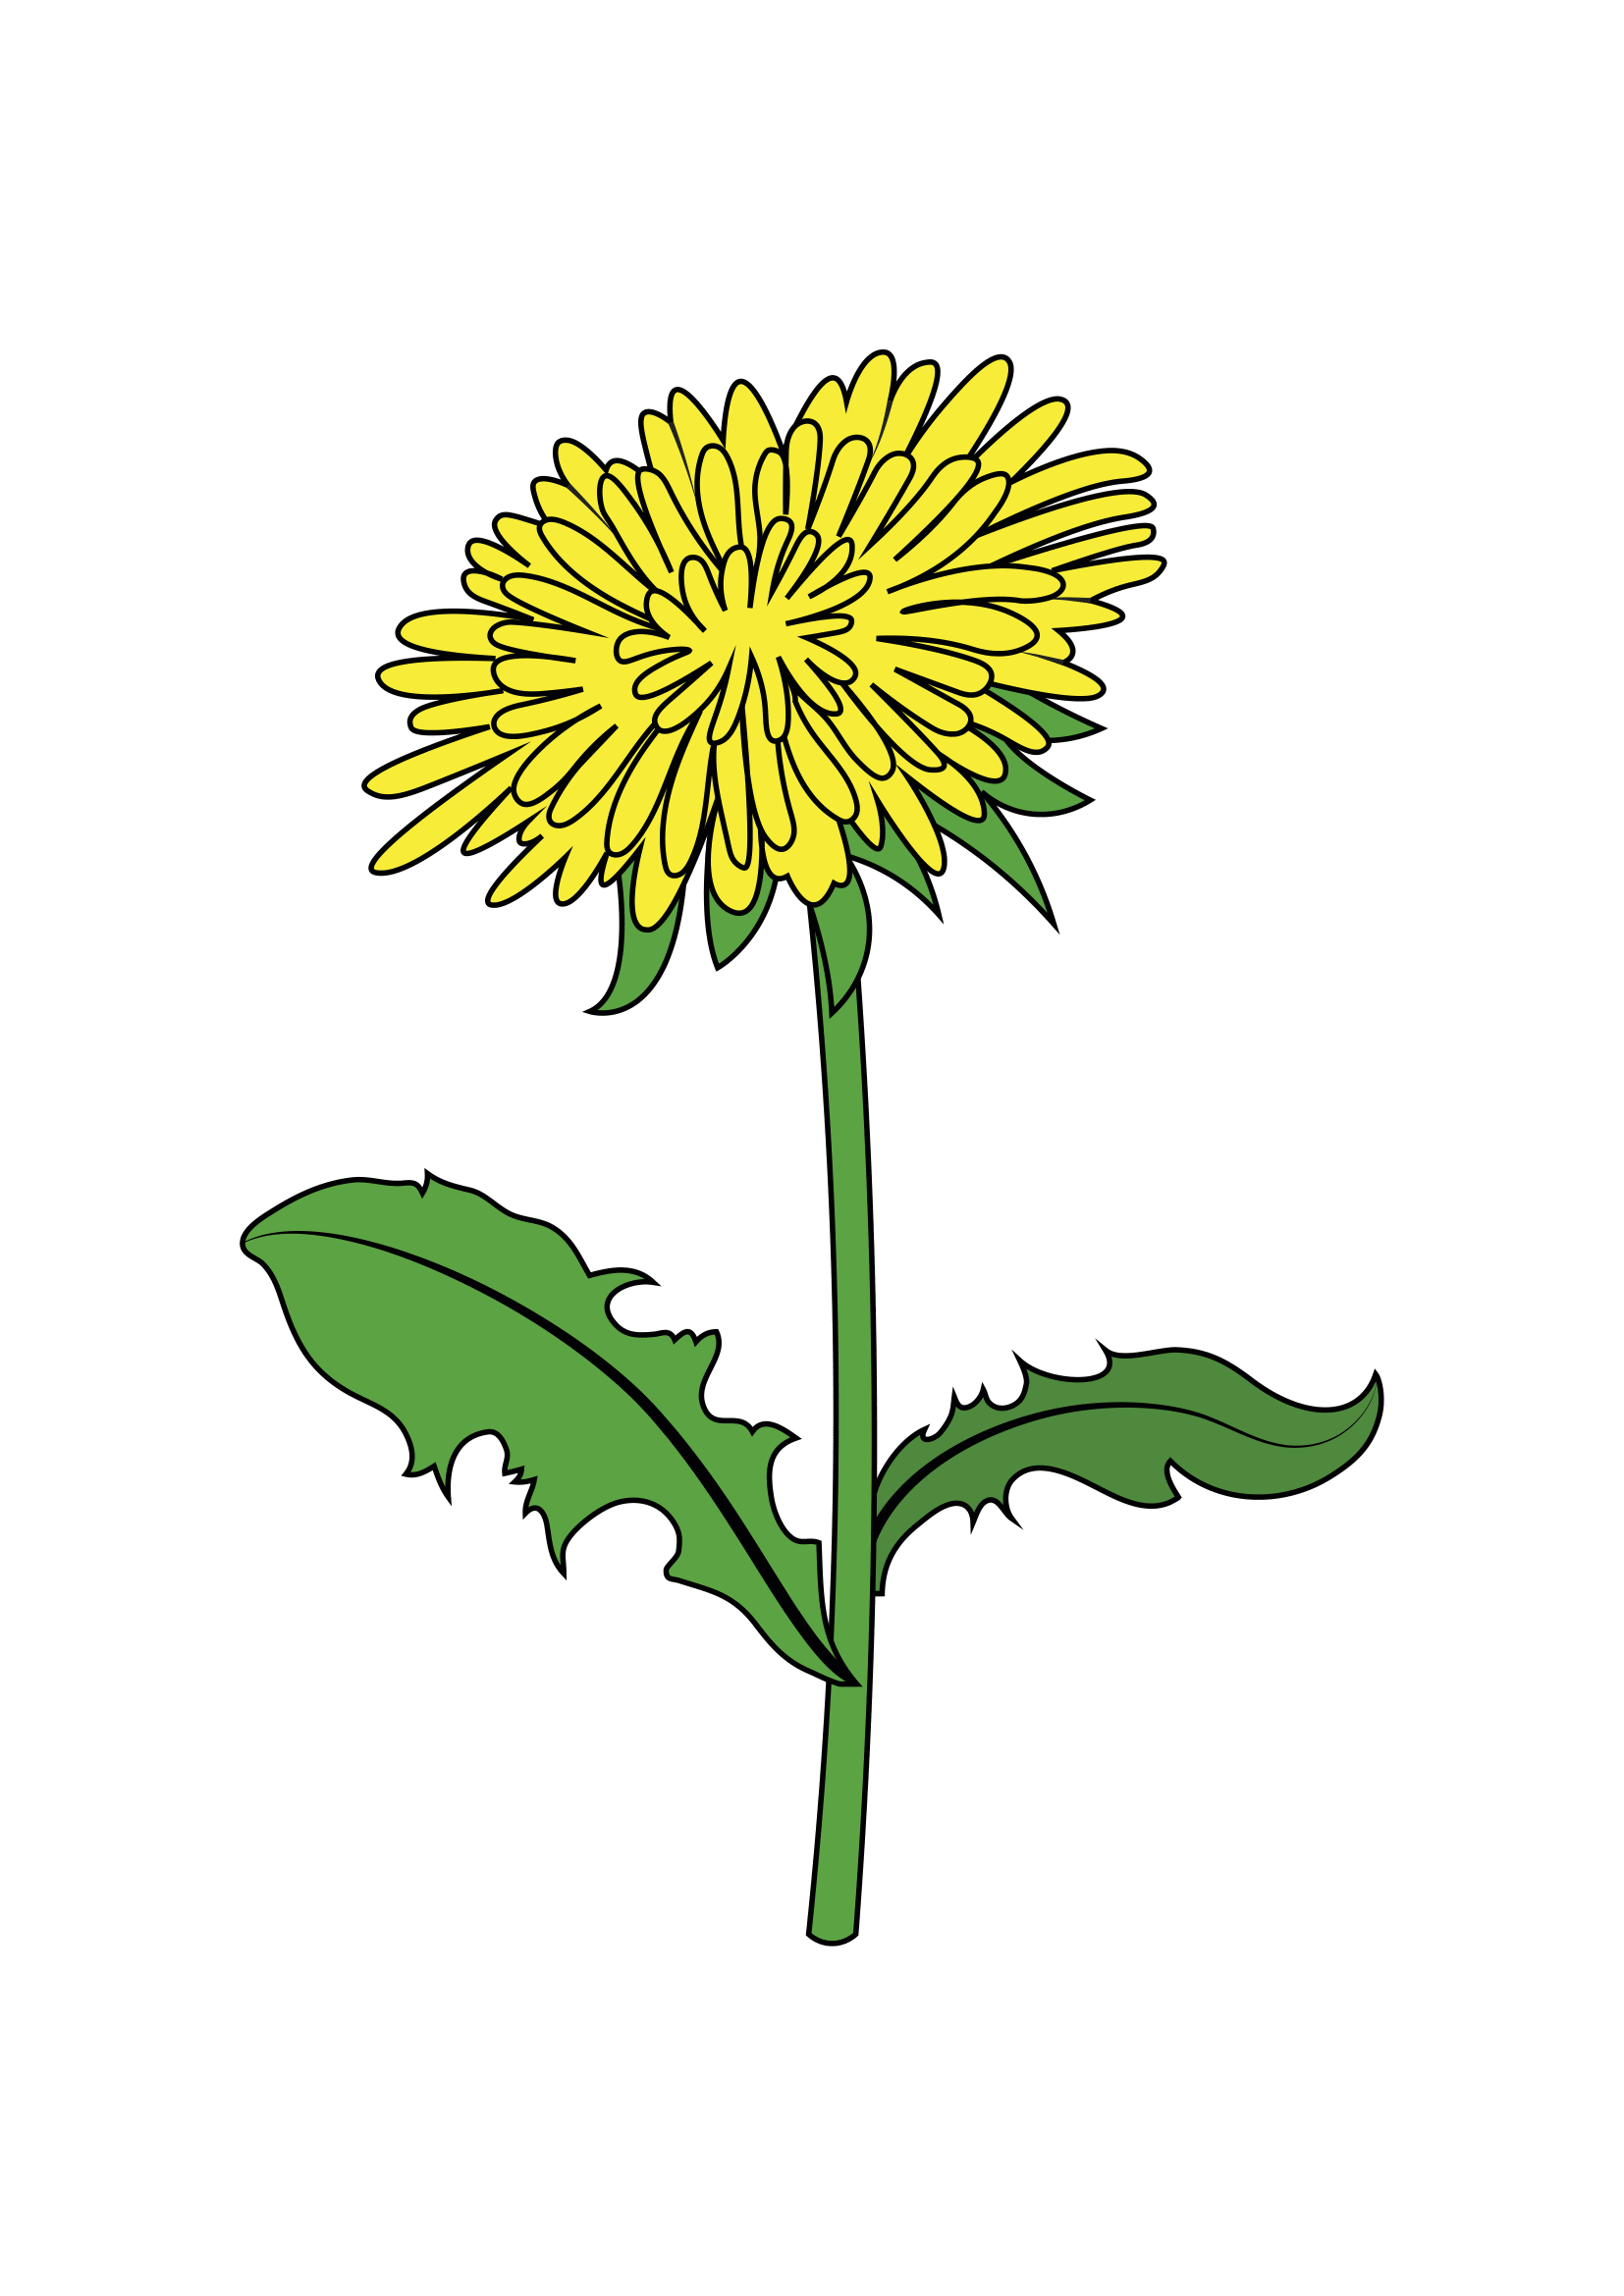 How to Draw A Dandelion Flower Step by Step Printable